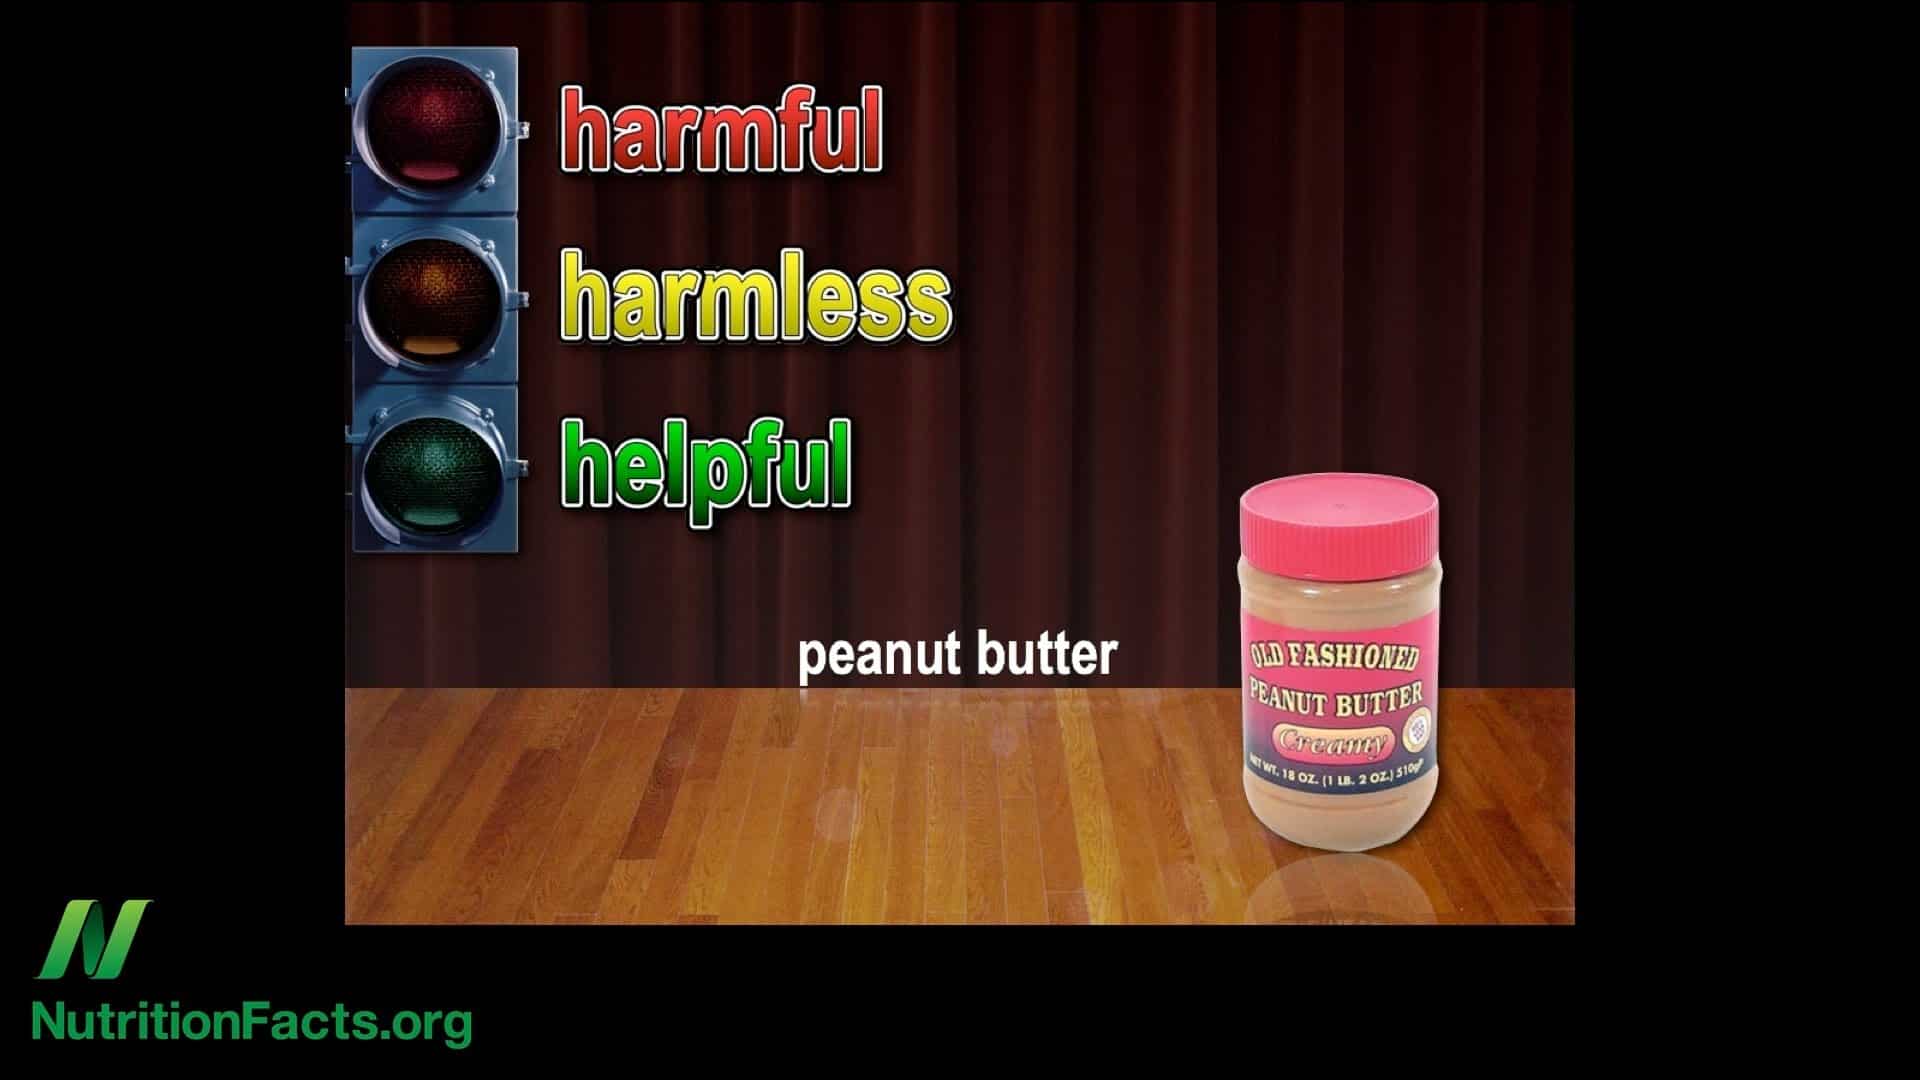 Is Peanut Butter Good for You